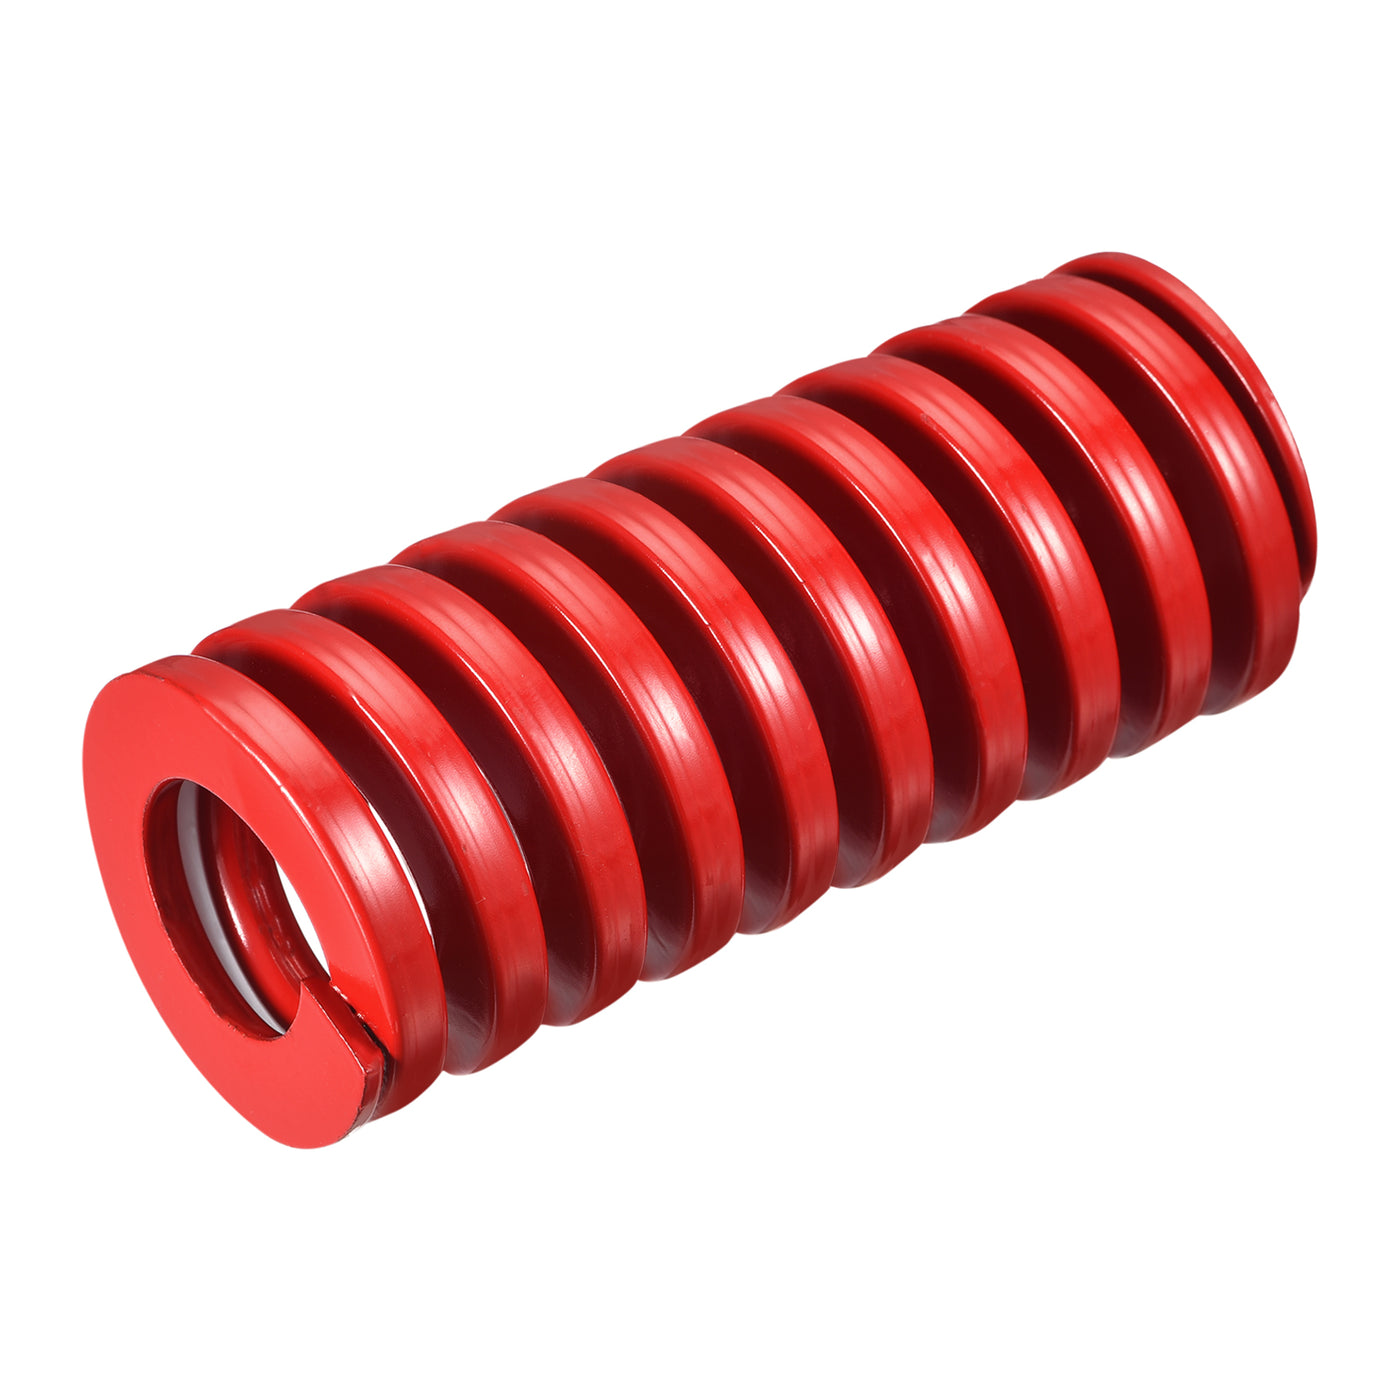 uxcell Uxcell Die Spring, 40mm OD 100mm Long Spiral Stamping Medium Load Compression, Red